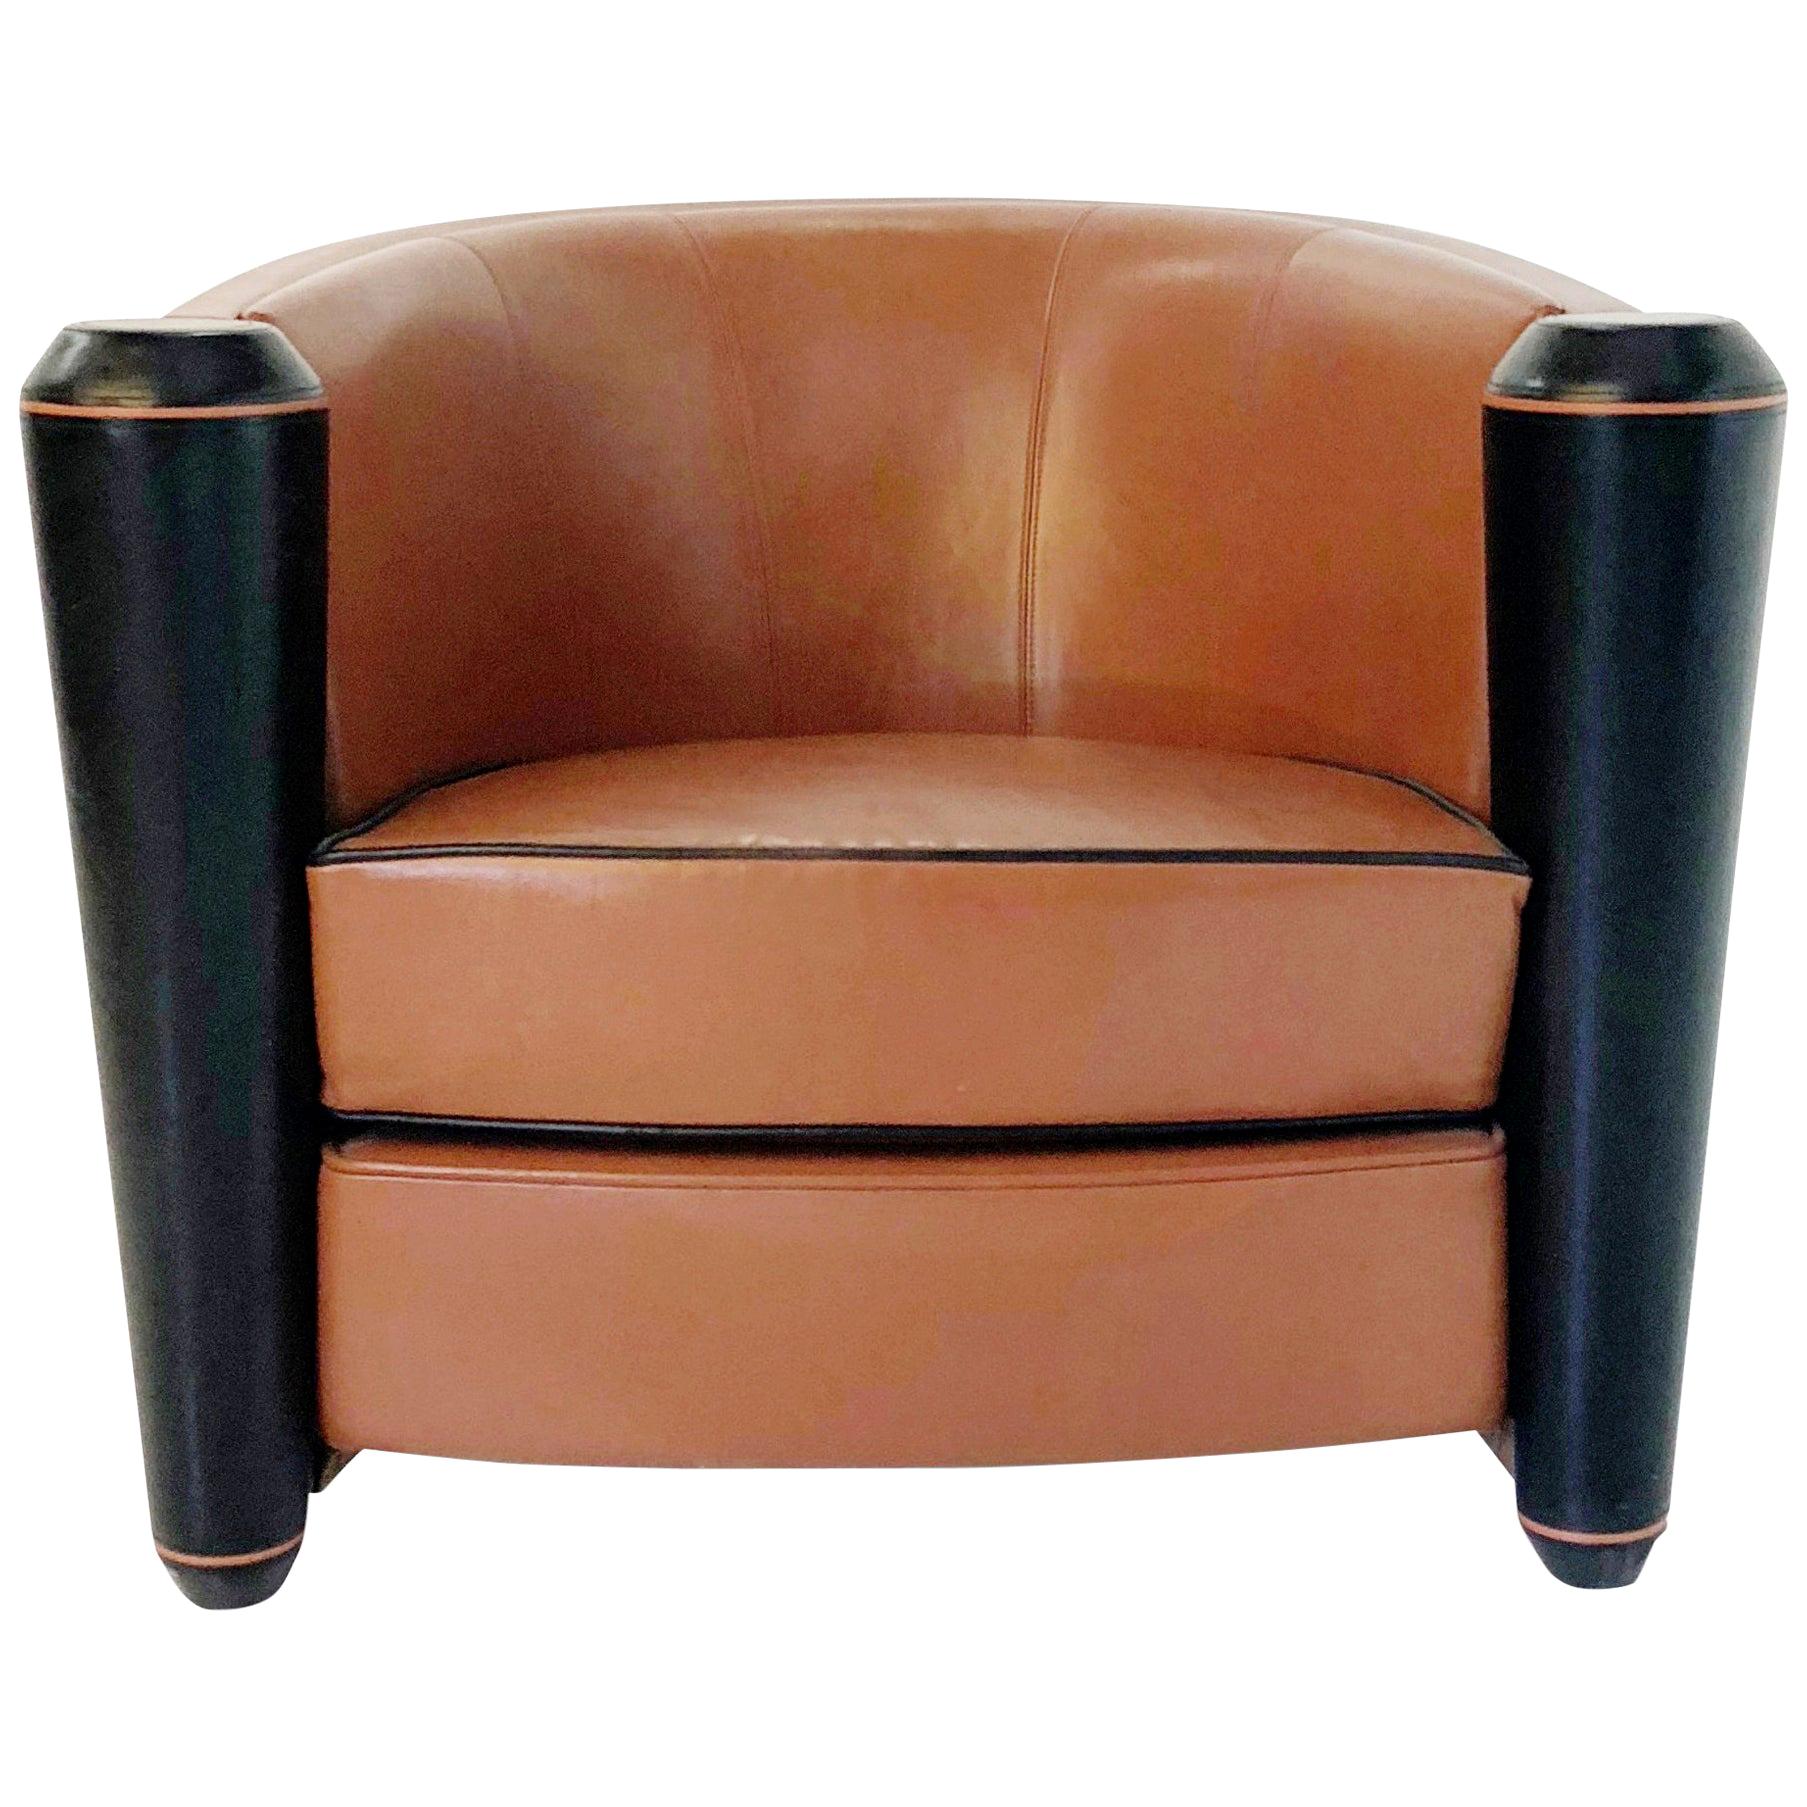 Adam Tihany Leather Club Chair for Pace Mariani, Italy, circa 1990